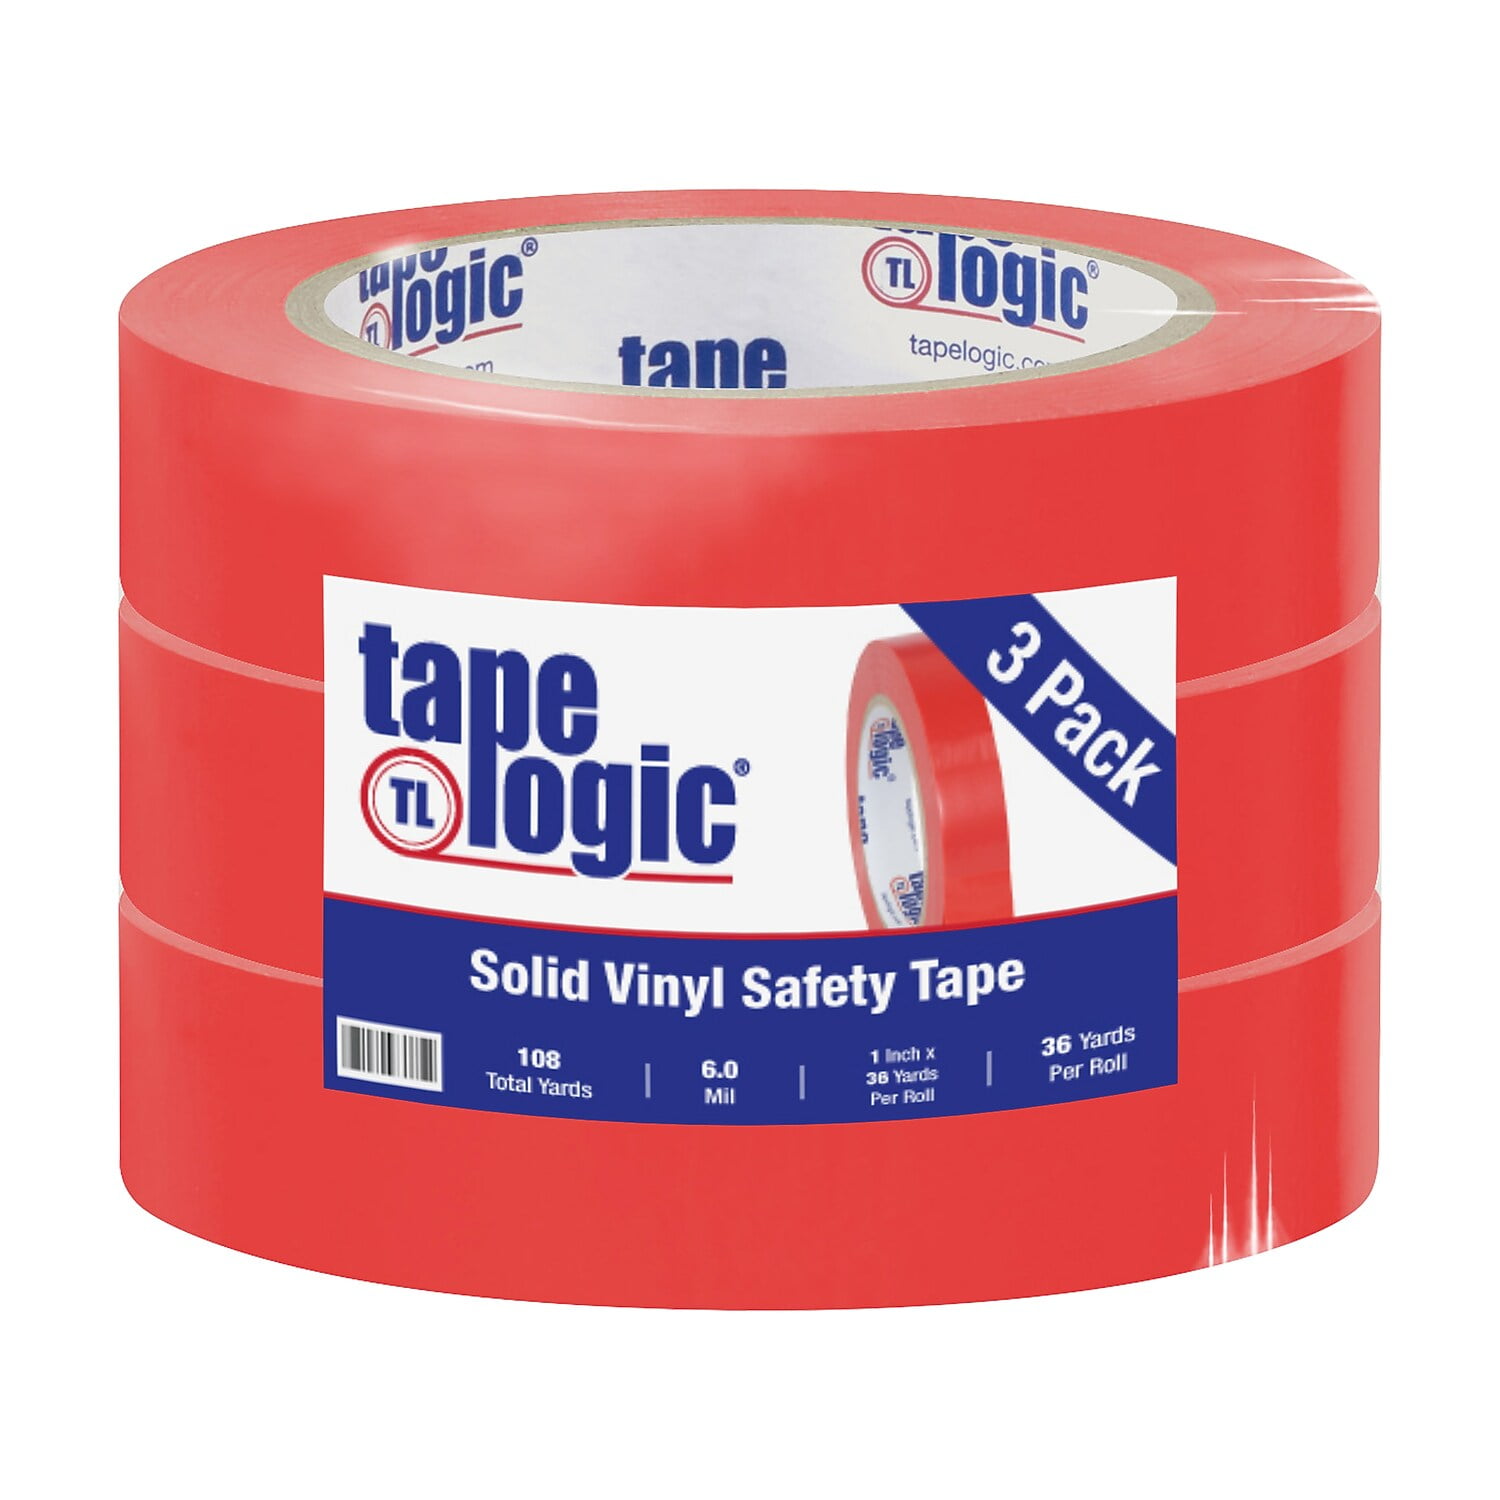 Tape Logic T91363pkr 1 In. X 36 Yards Red Solid Vinyl Safety Tape - Pack Of 3